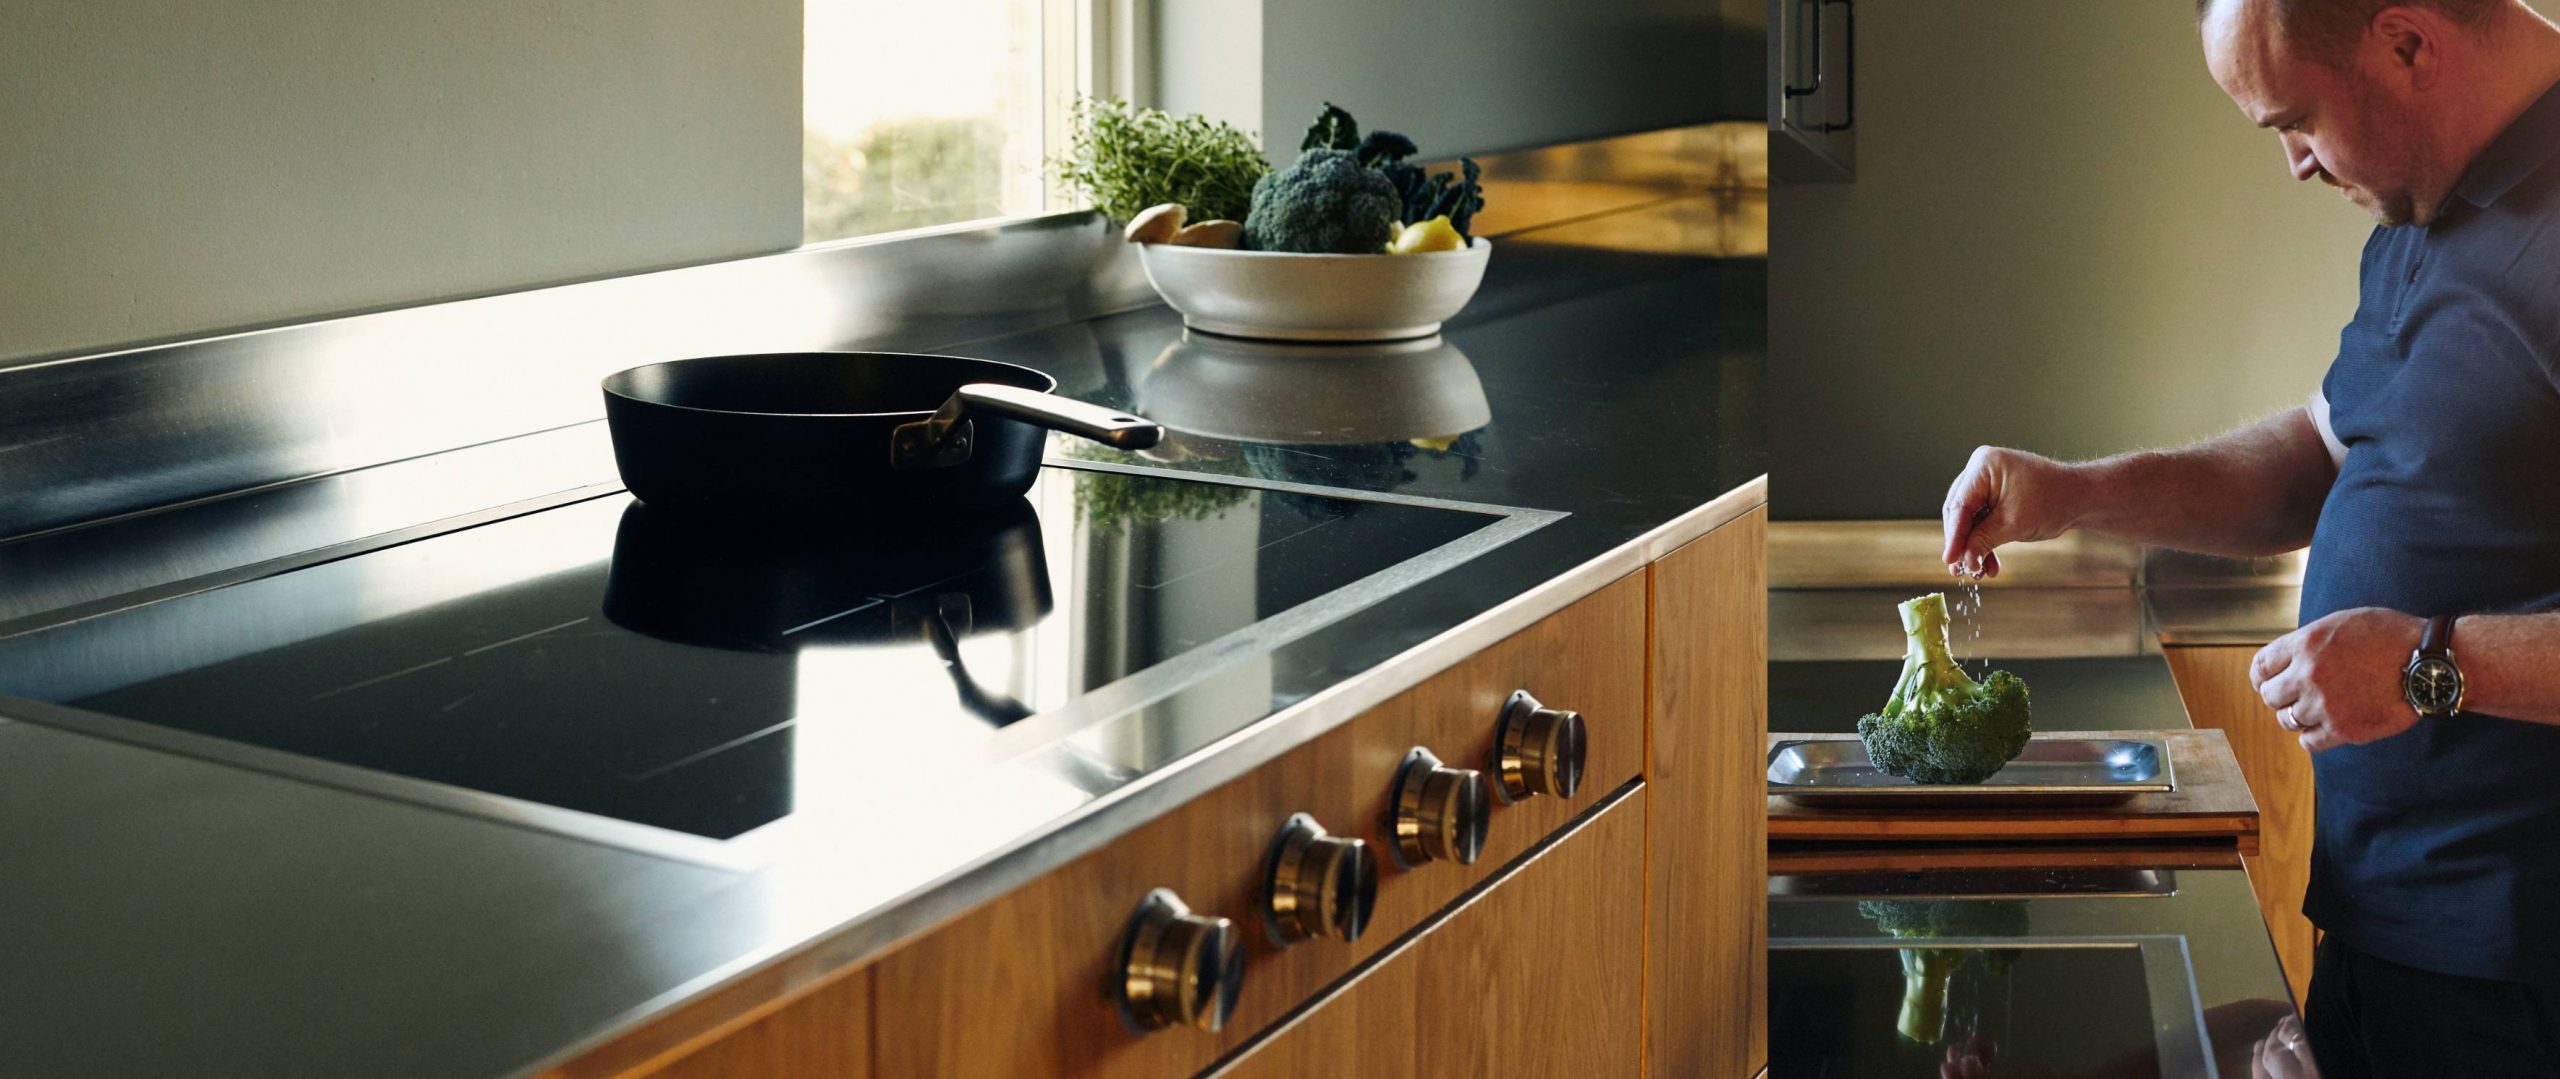 Gaggenau cooktop and chef